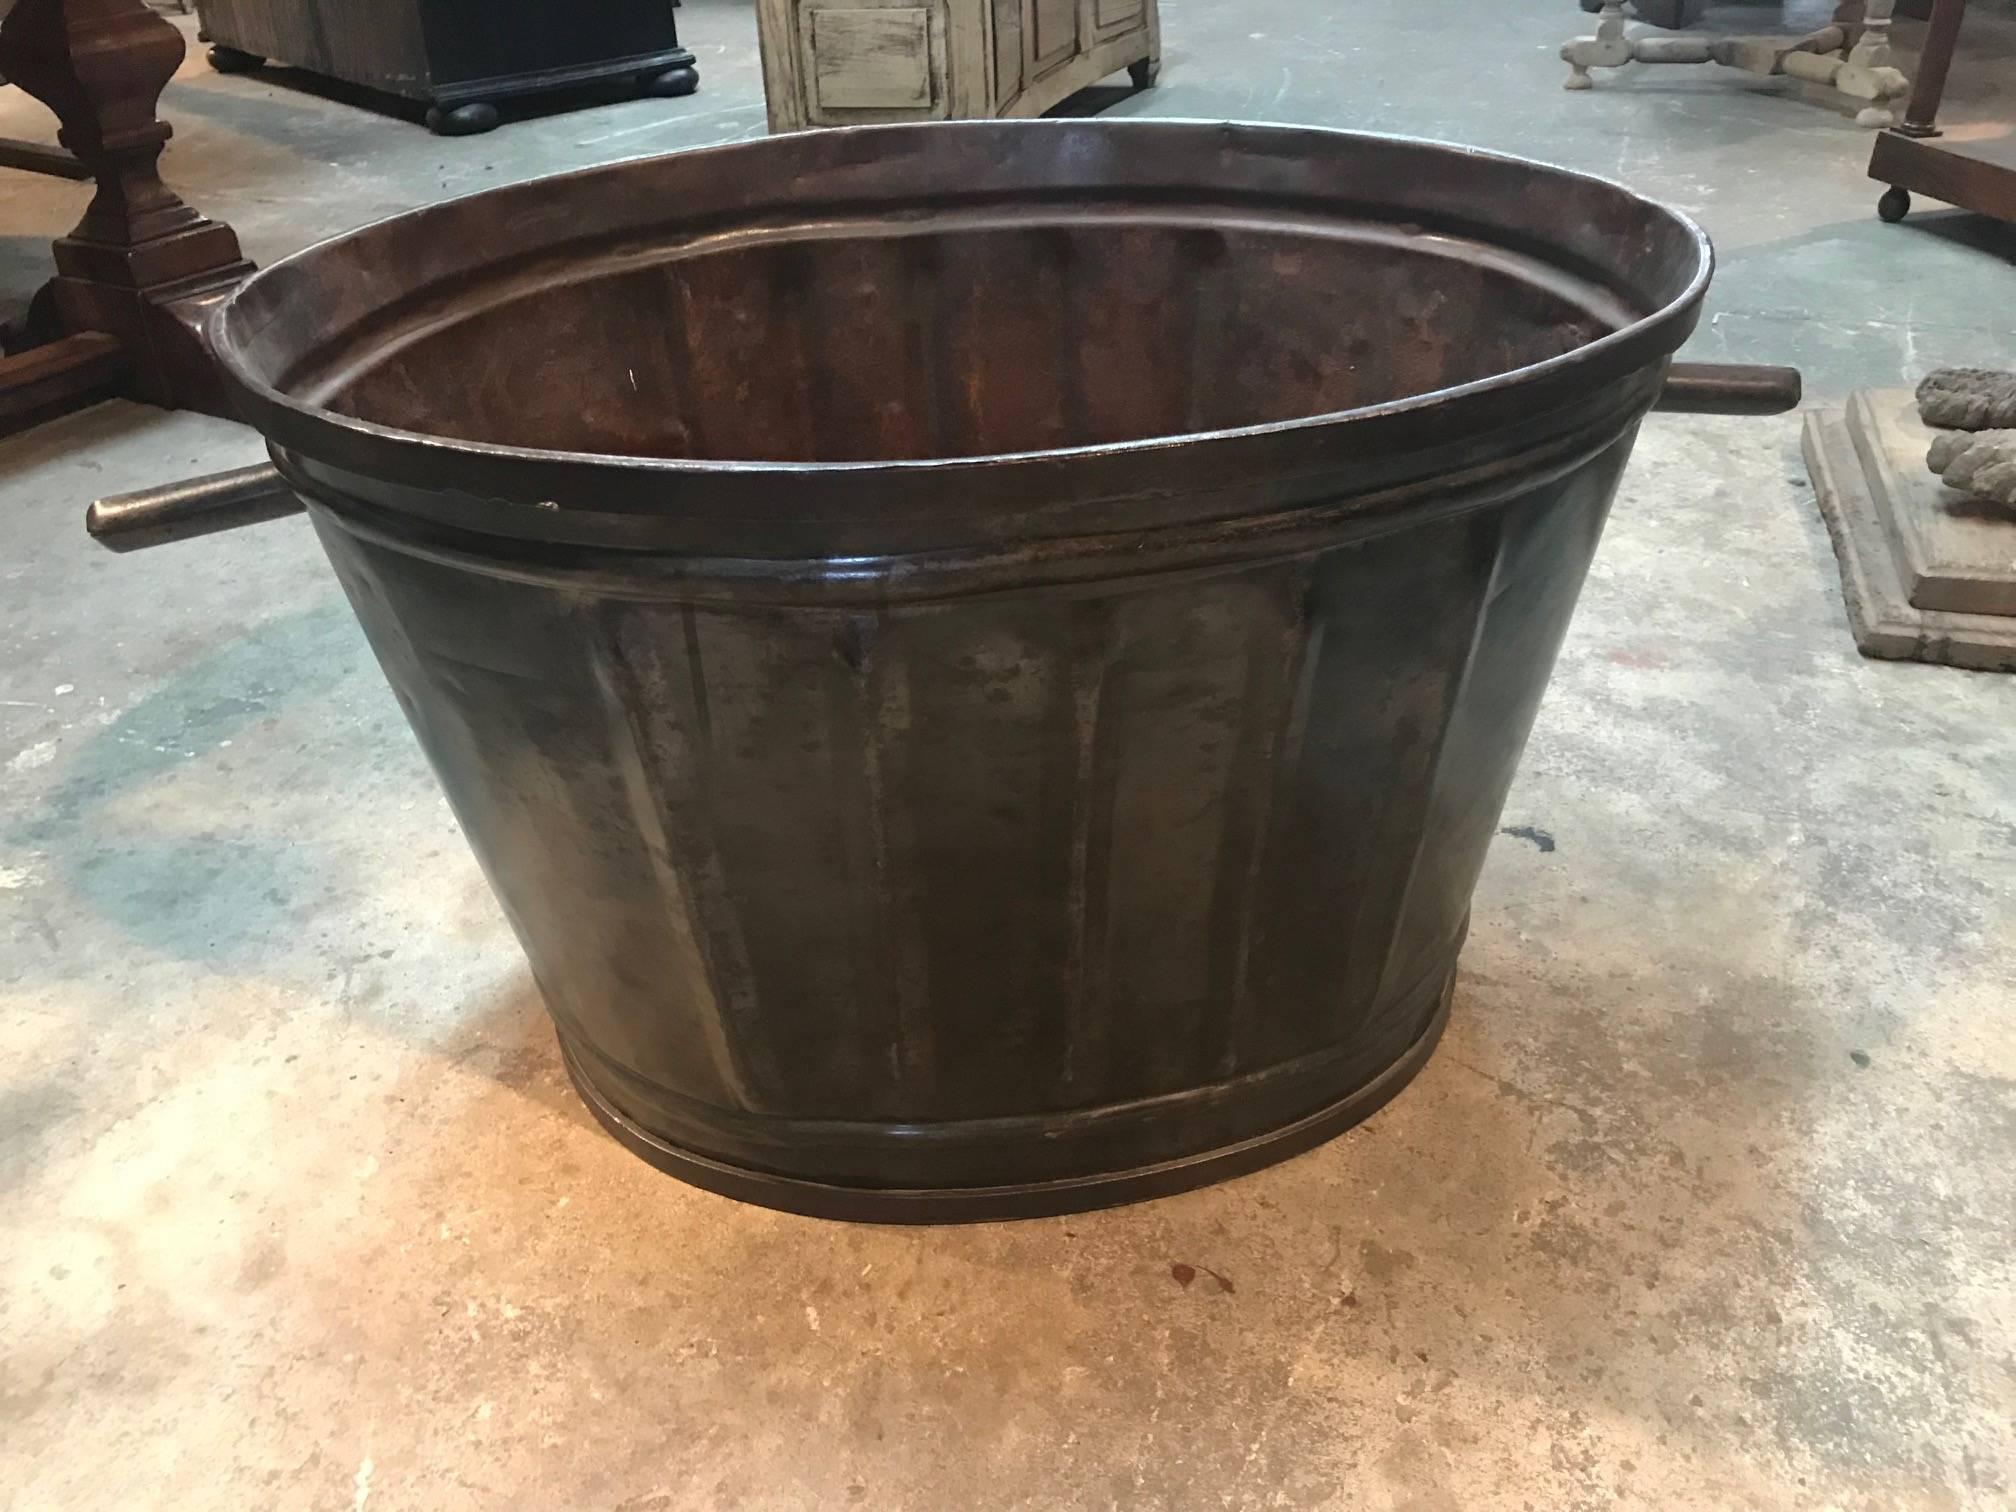 Wonderful later 19th century grape harvesting baskets - Buckets from a vineyard in the South of France. Soundly made from metal with handles. Terrific to use pool side for beach towels, by the fireplace for kindling or as jardiniers or planters.